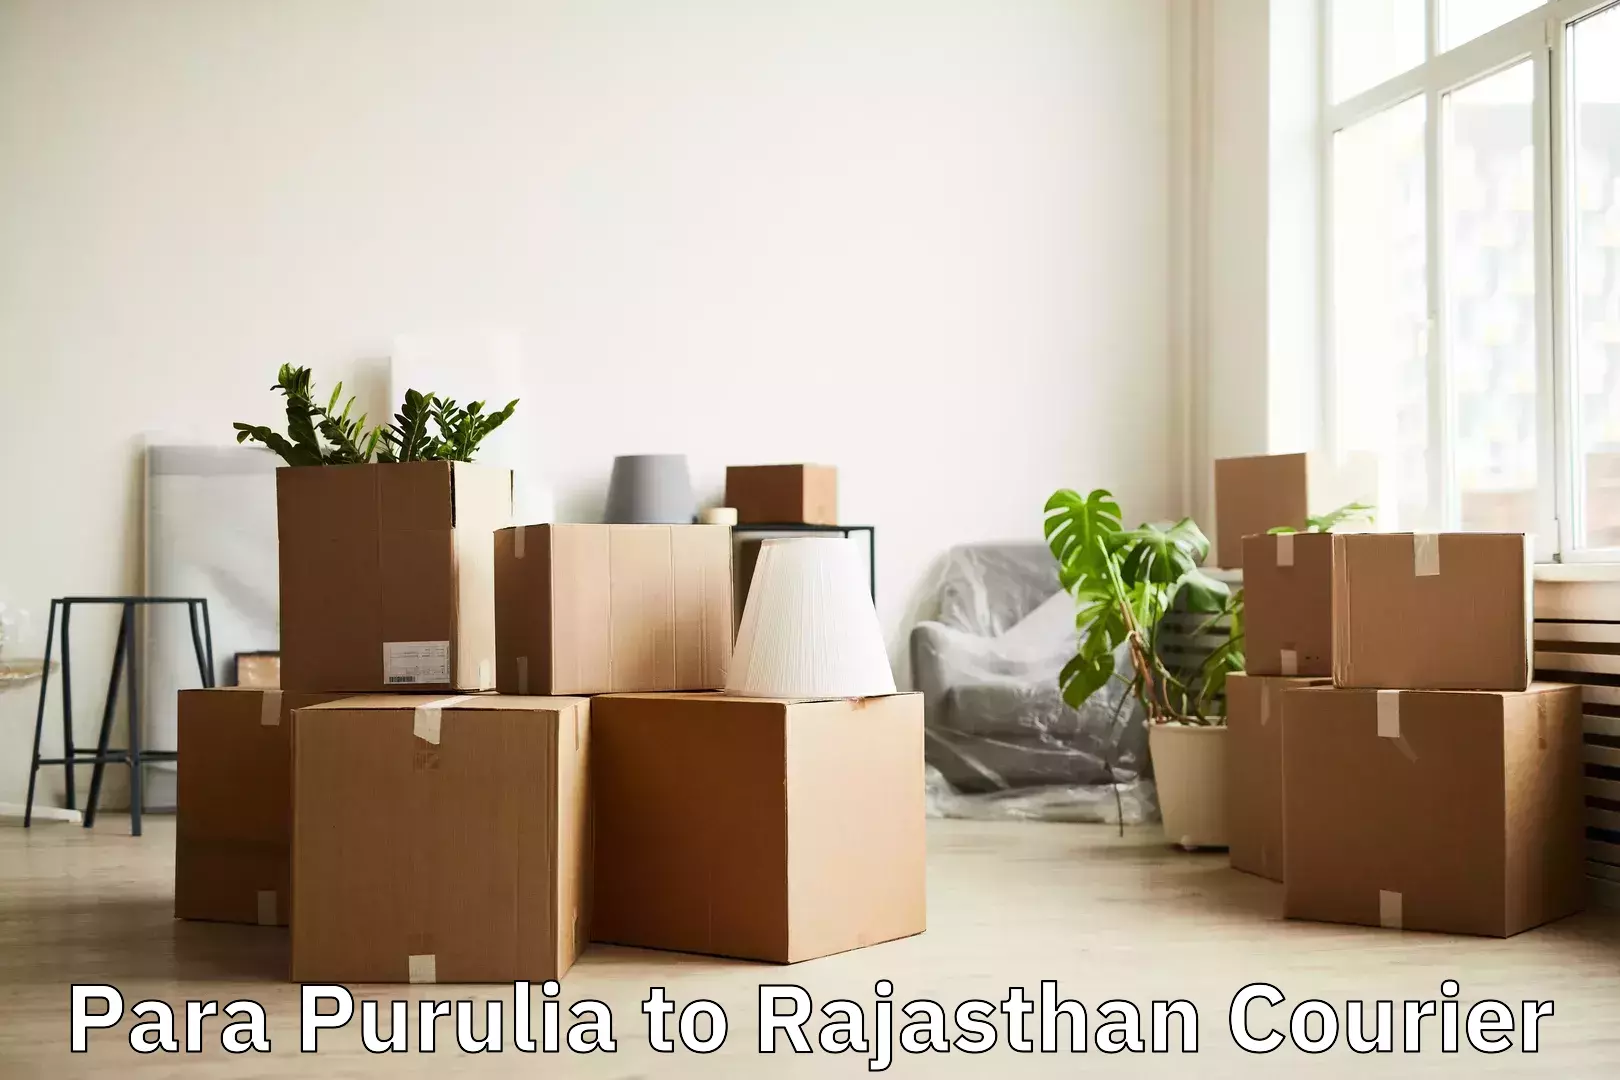 Personal effects shipping in Para Purulia to Mathania